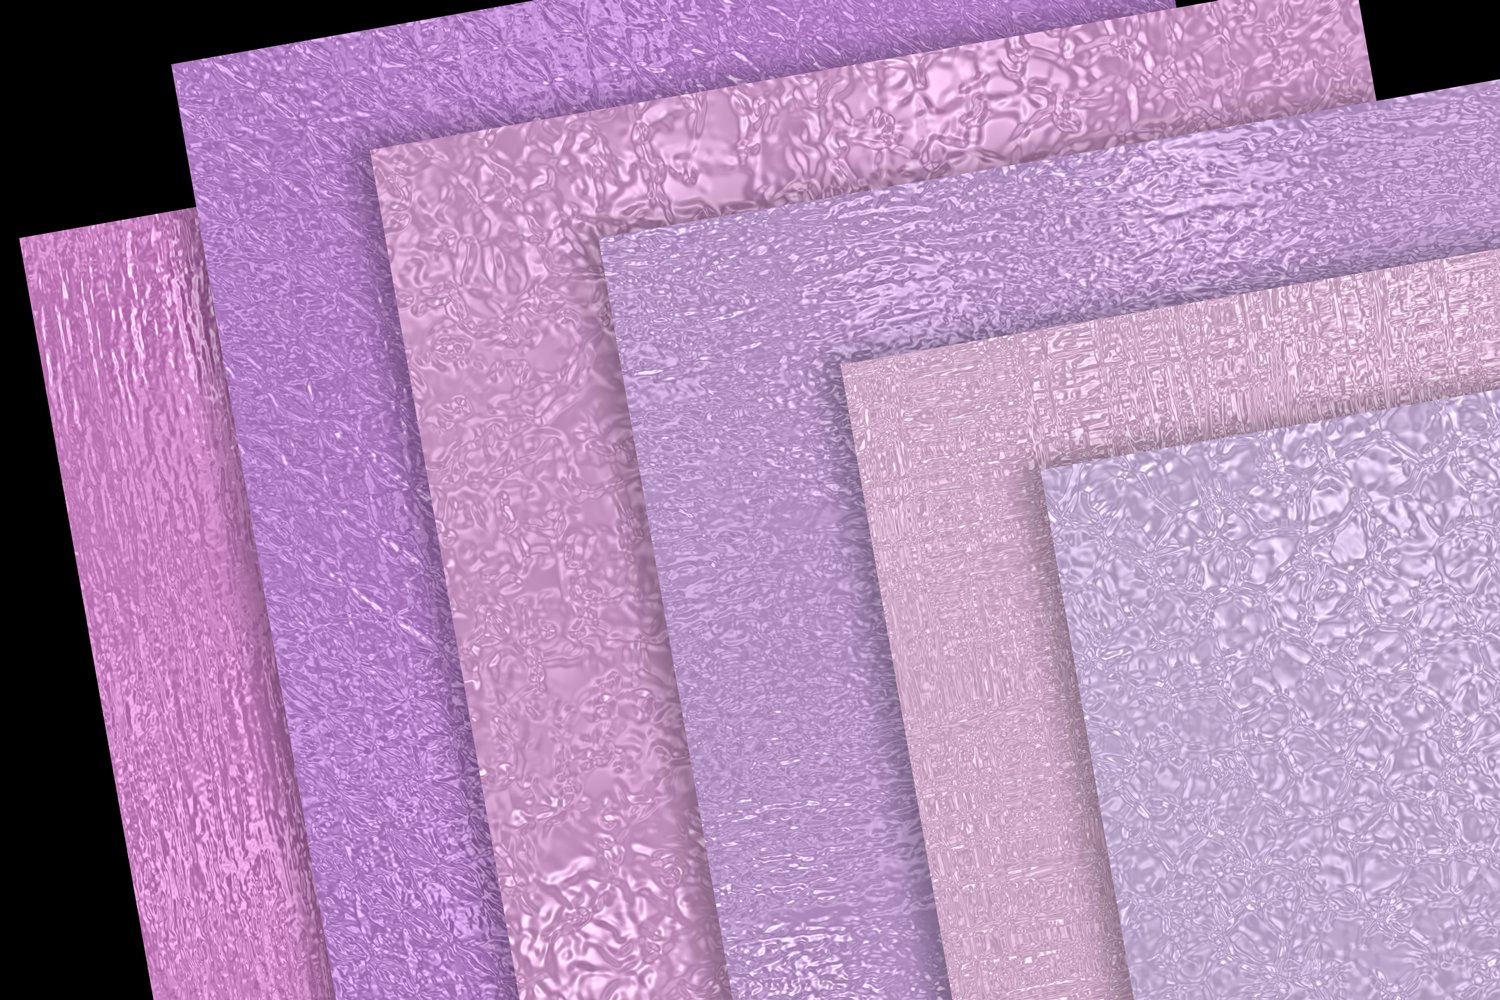 Pink and Purple Metallics preview image.